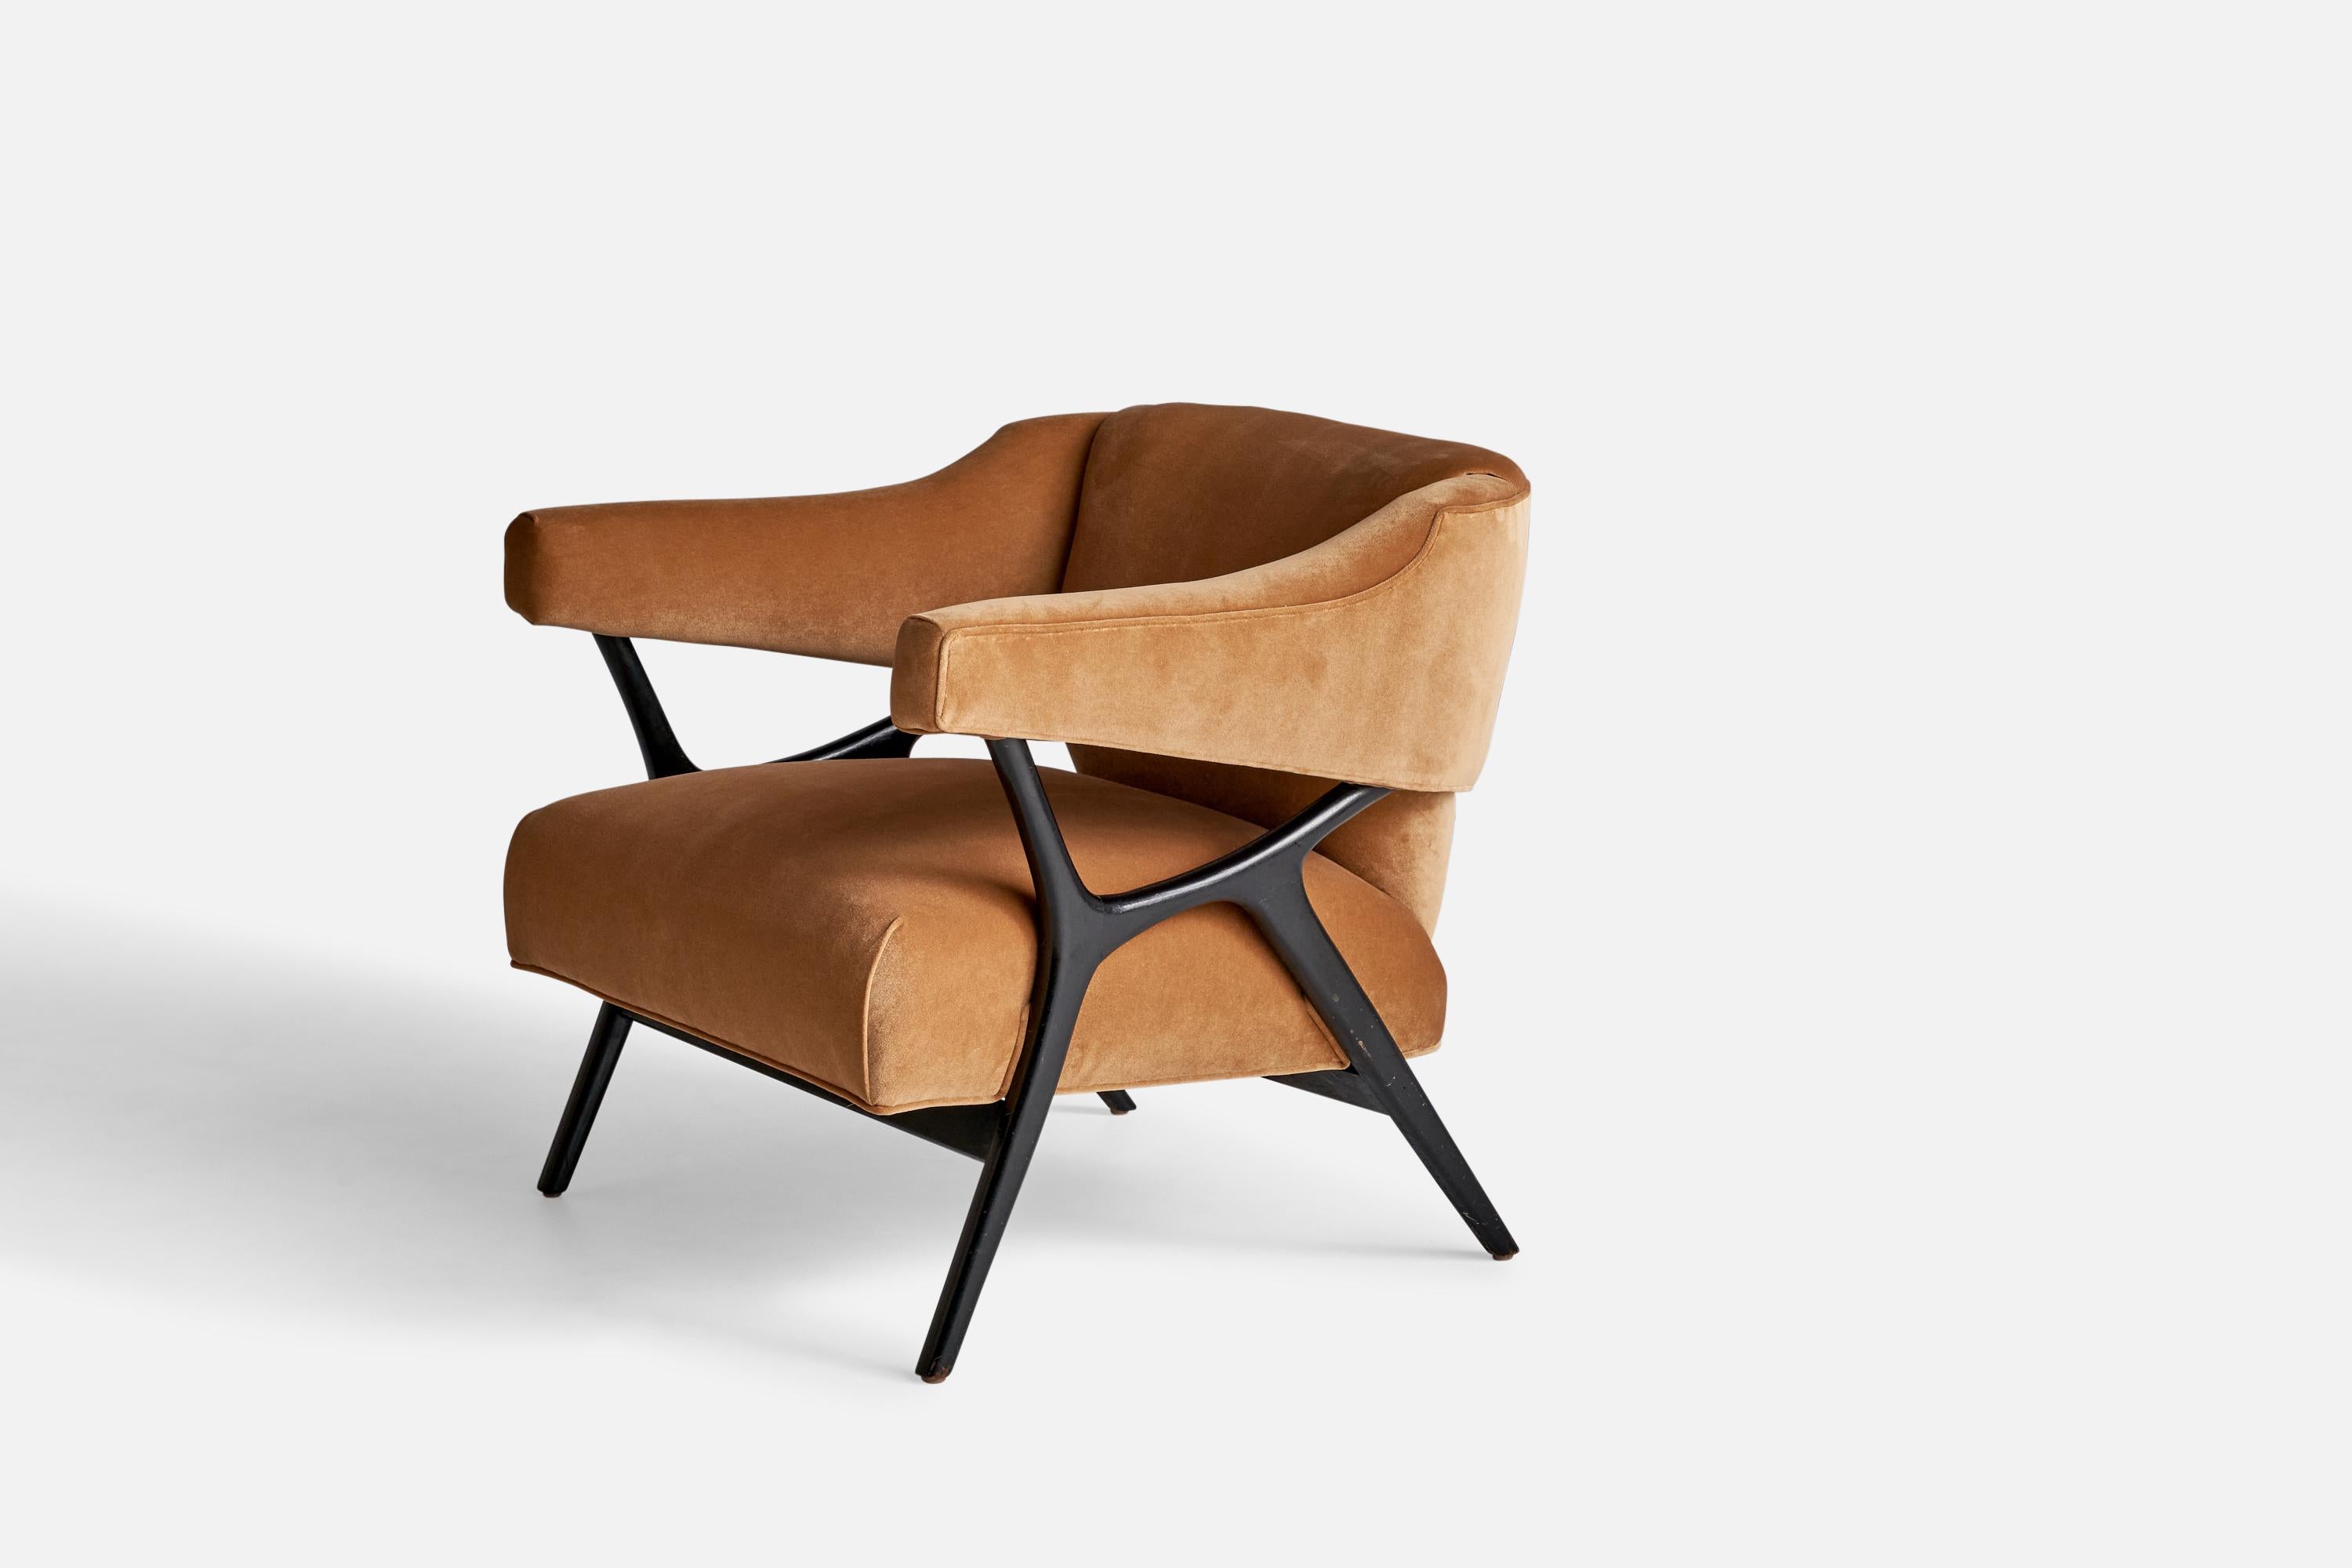 A black-painted wood and orange brown velvet lounge chair designed by Ward Bennet, 1958.

Seat height 16.25”